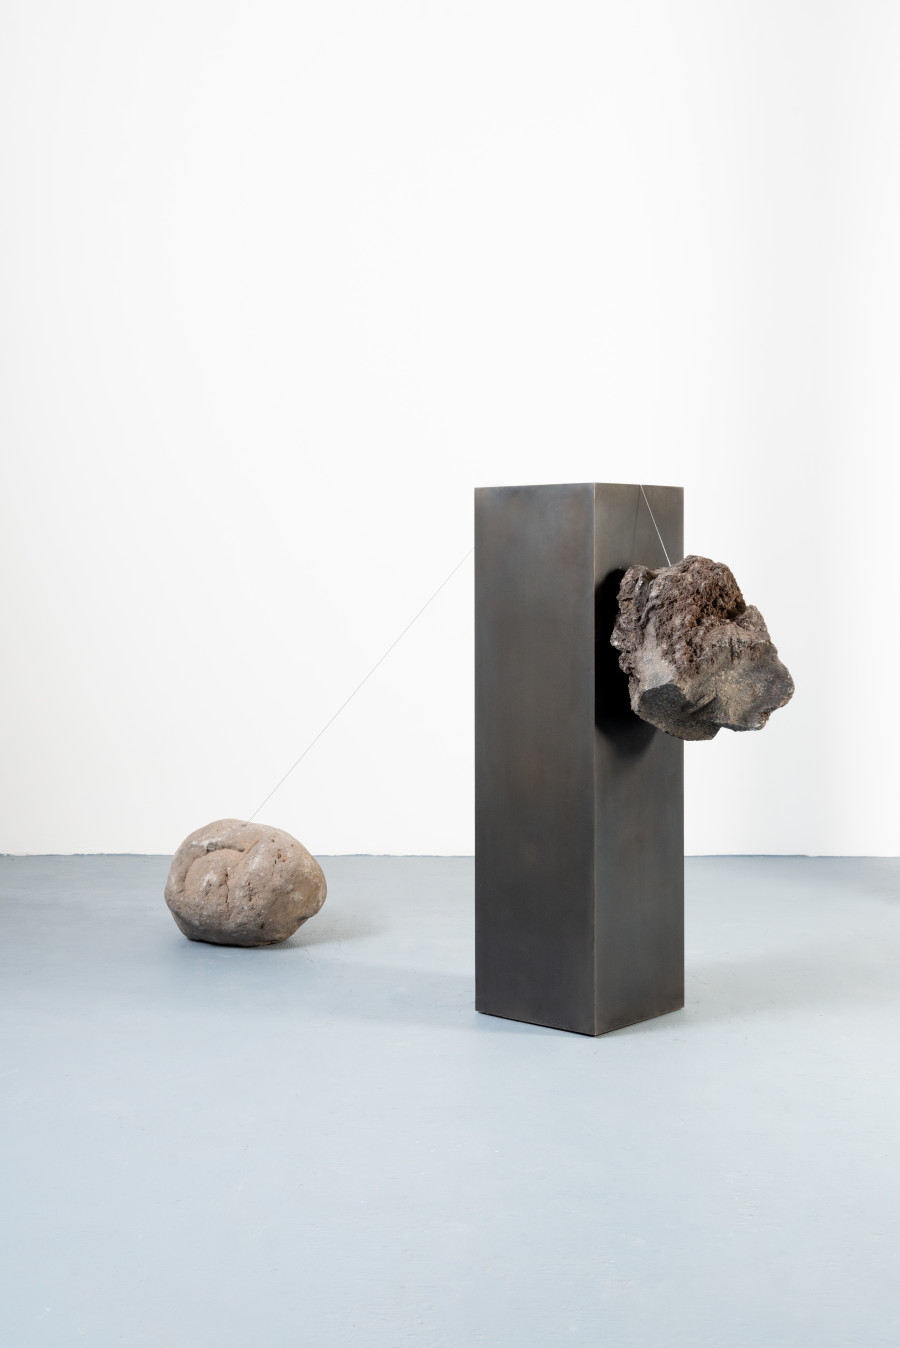 Jose Dávila, Our similarities bring us to a common ground, 2021, Metal, rock, boulder, and wire, 140 x 227.5 x 40 cm. Photo: Agustín Arce